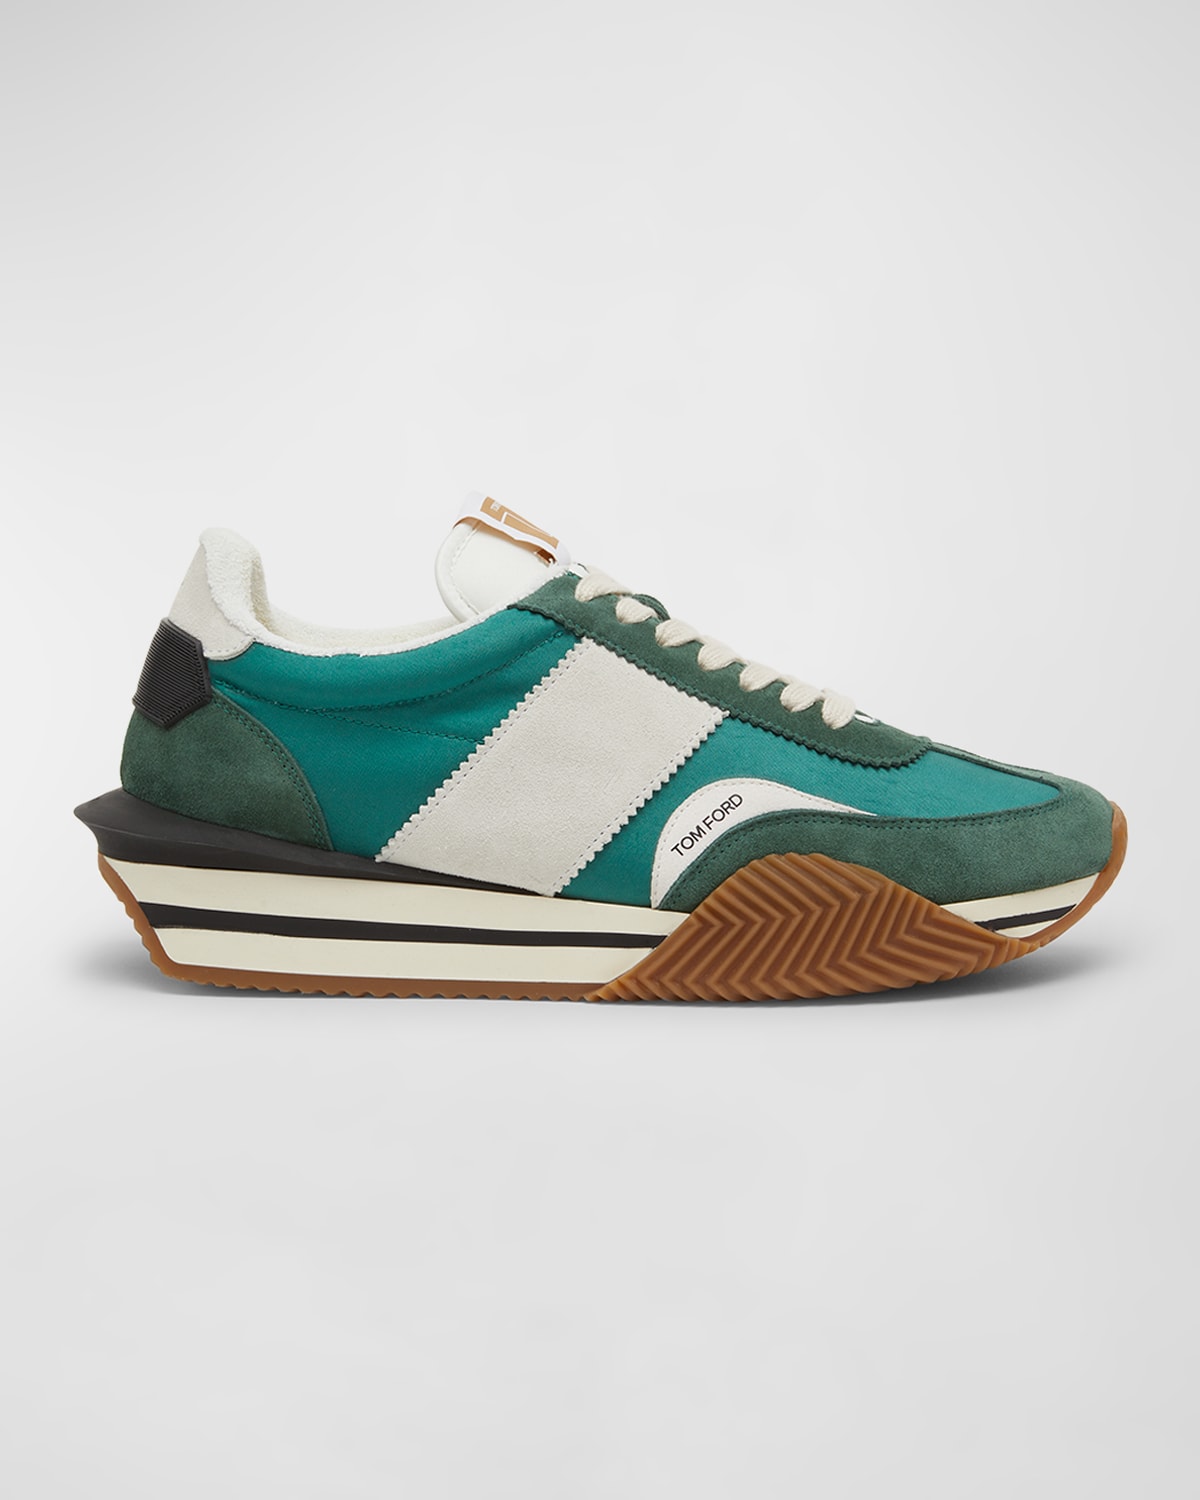 Tom Ford James Suede Technical Fabric In Pine Green Cream